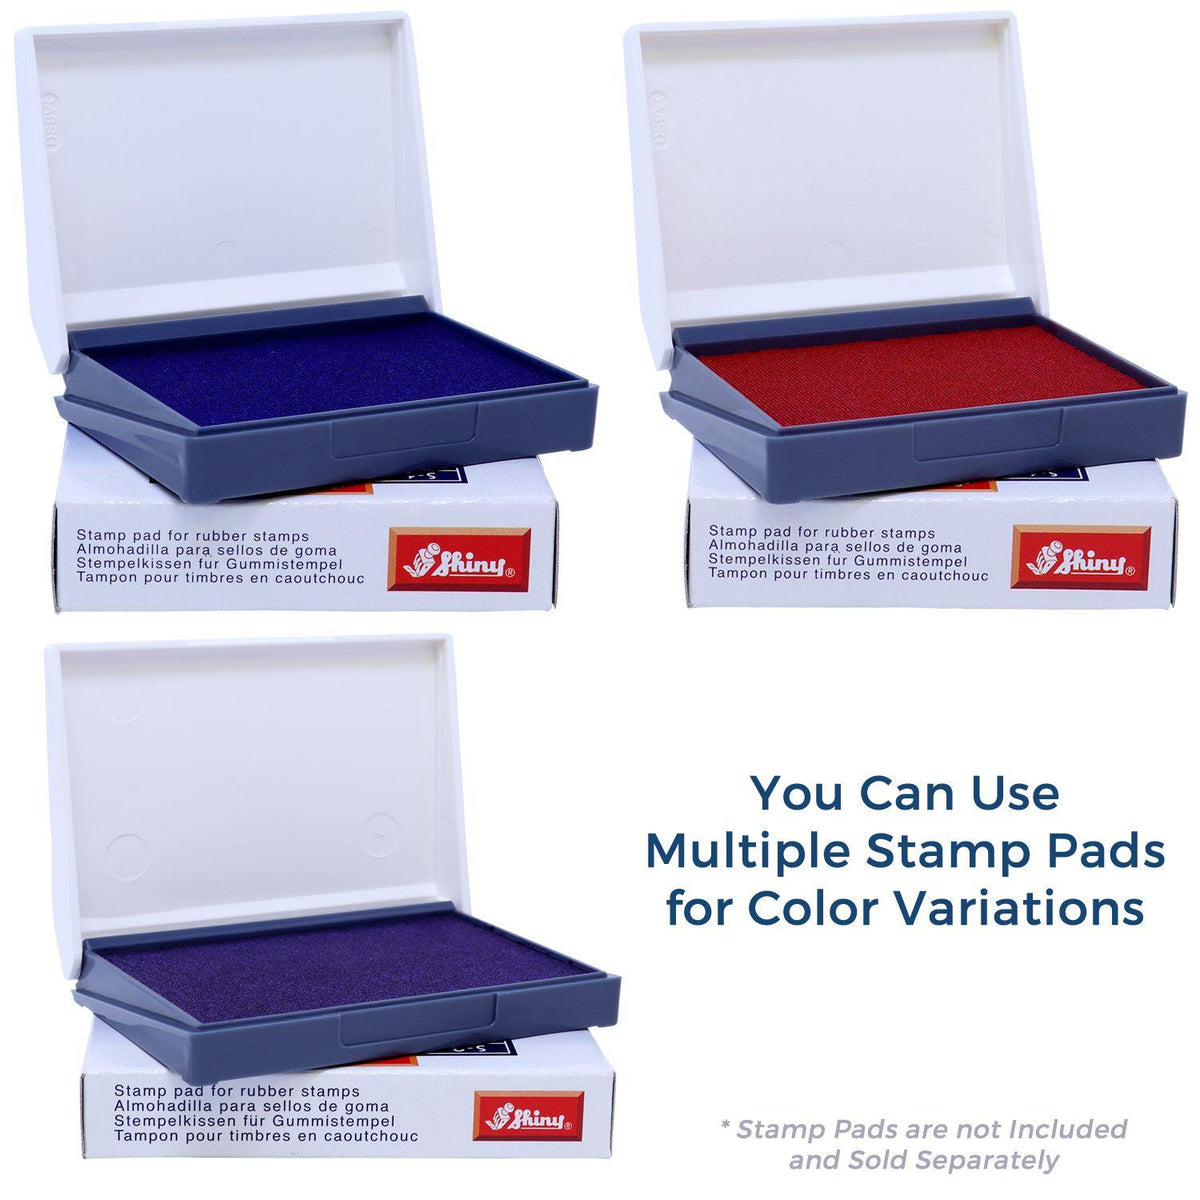 Stamp Pads for Large Express Mail International Rubber Stamp Available